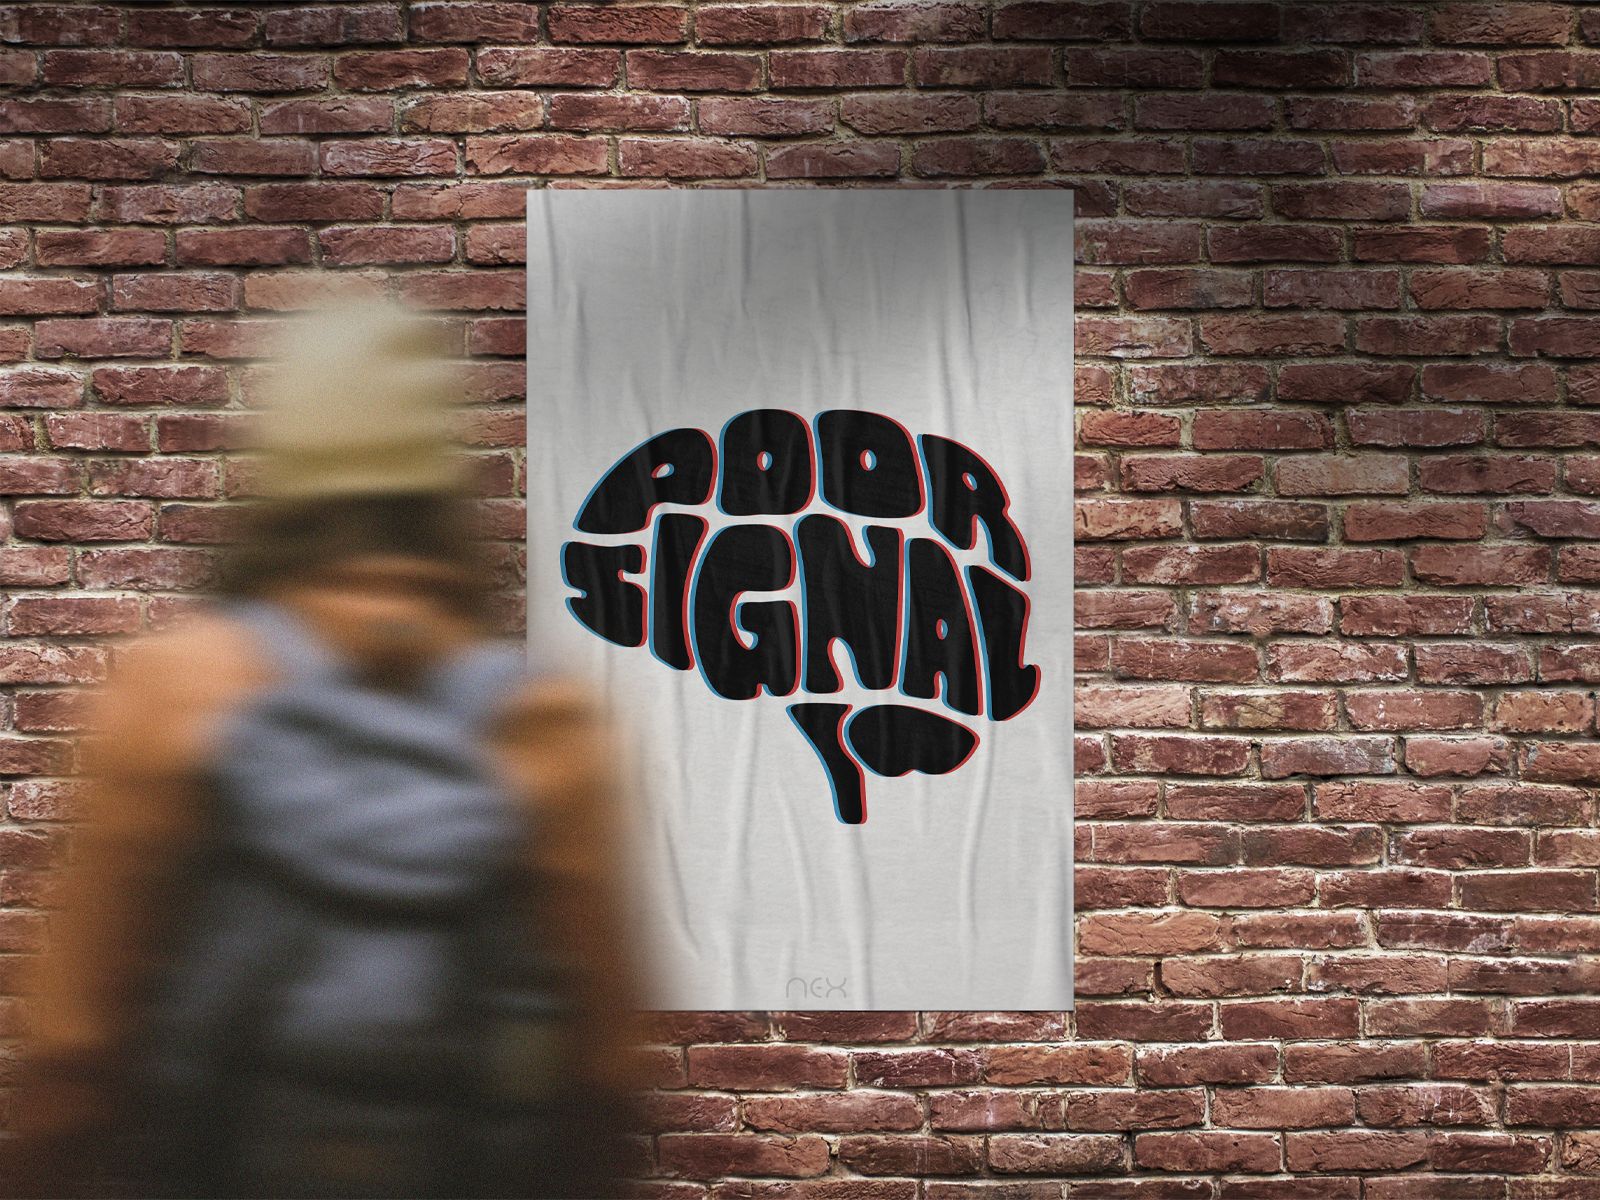 Poor Signal poster